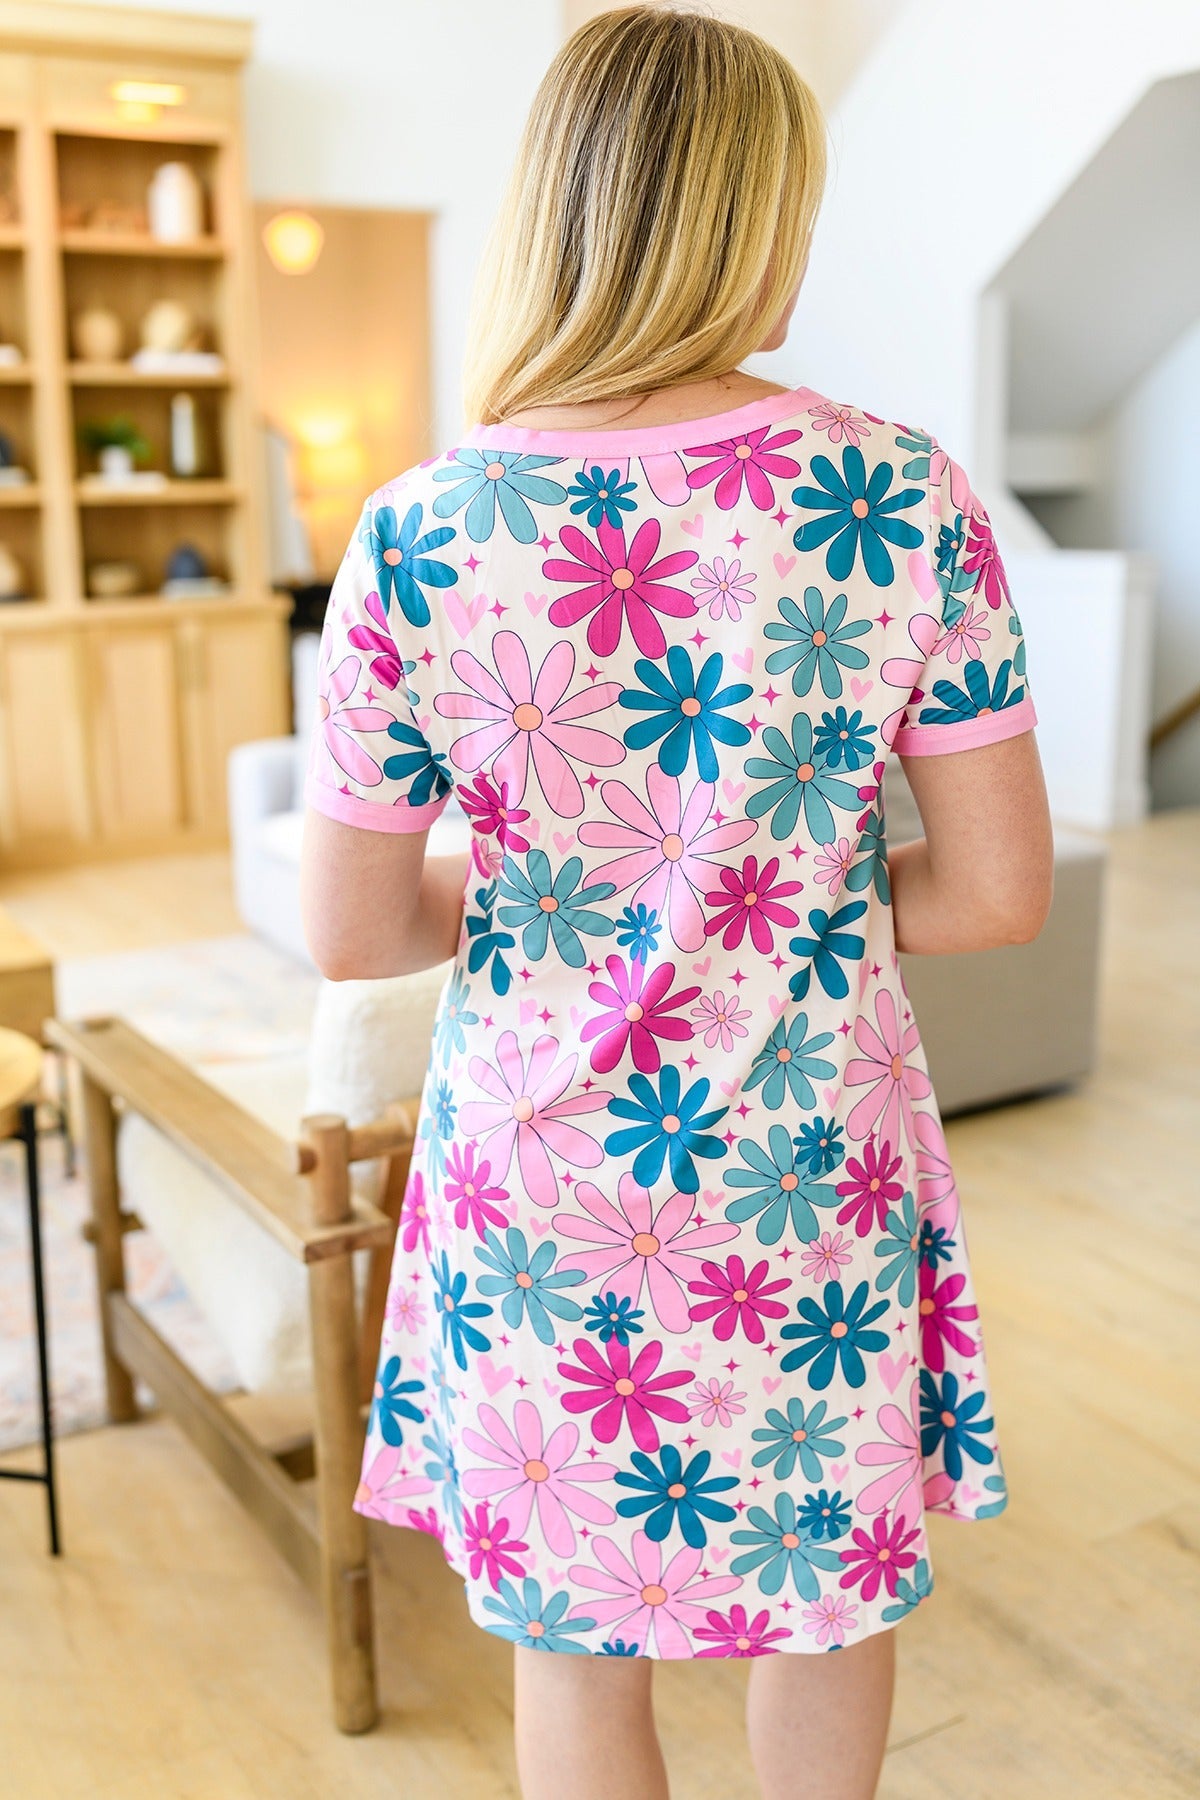 PREORDER: Short Sleeve Night Dress in Six Prints-Womens-Ave Shops-Market Street Nest, Fashionable Clothing, Shoes and Home Décor Located in Mabank, TX